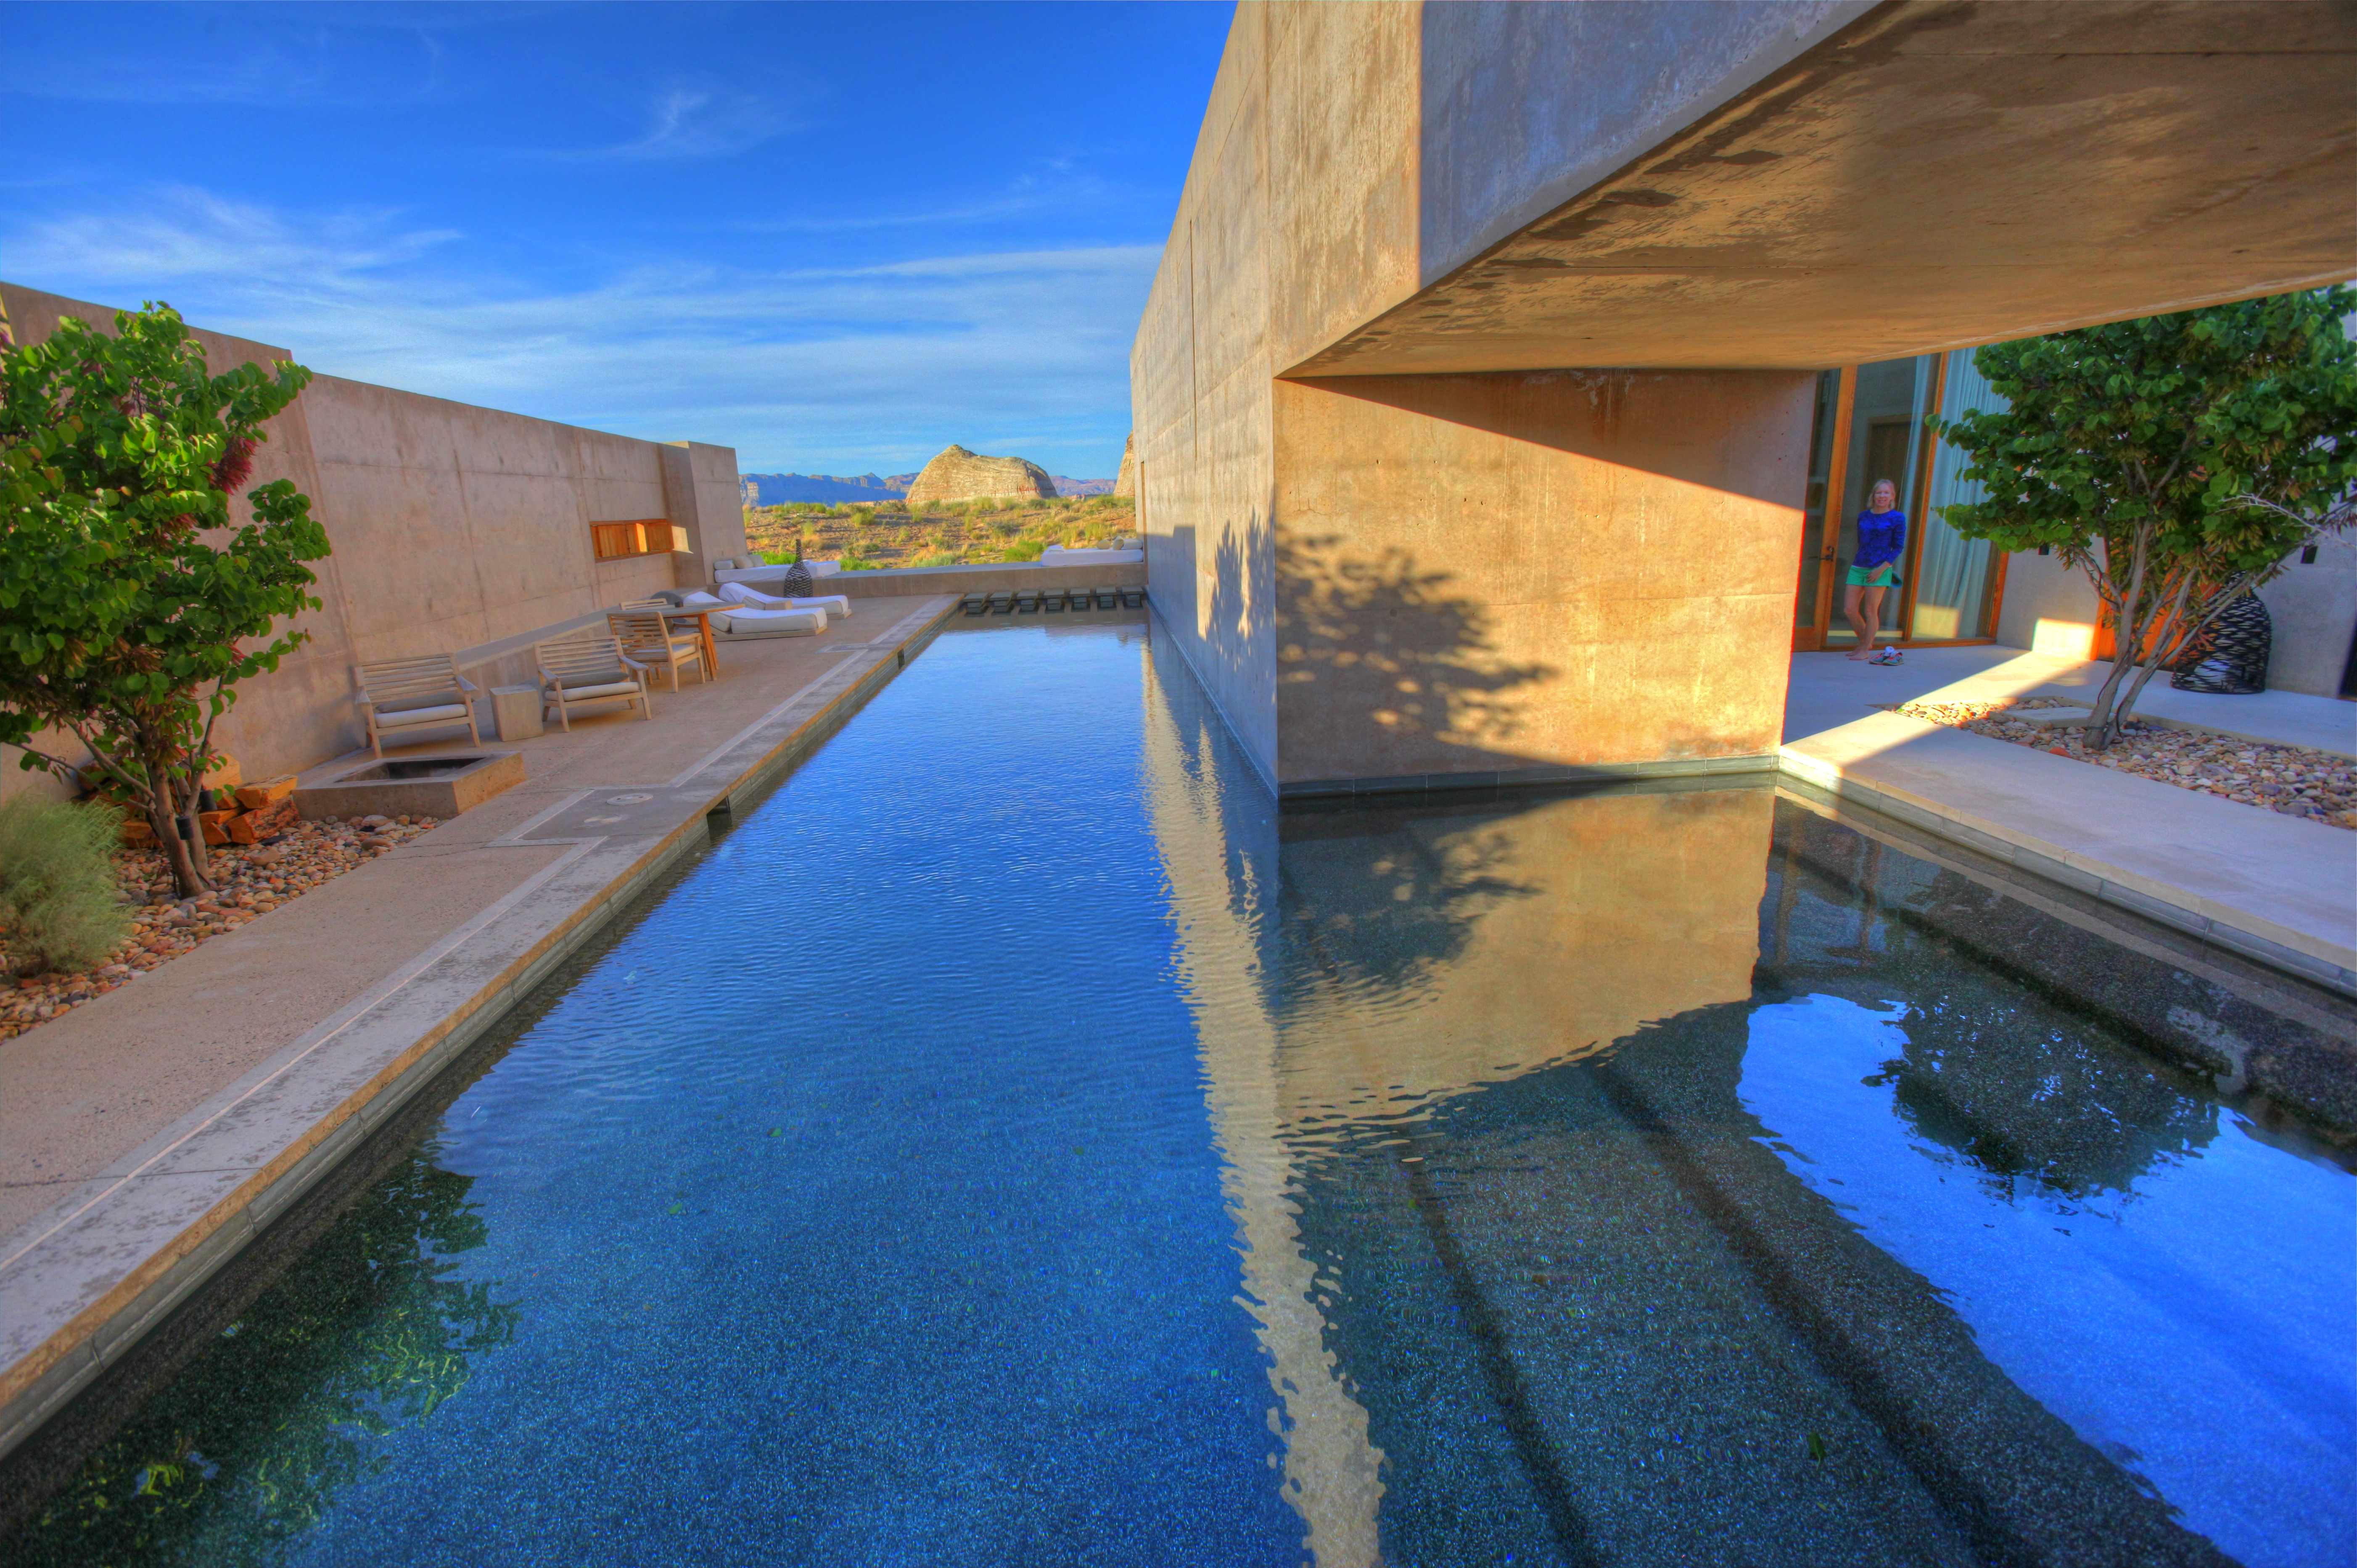 Utah has one of the World's top spas